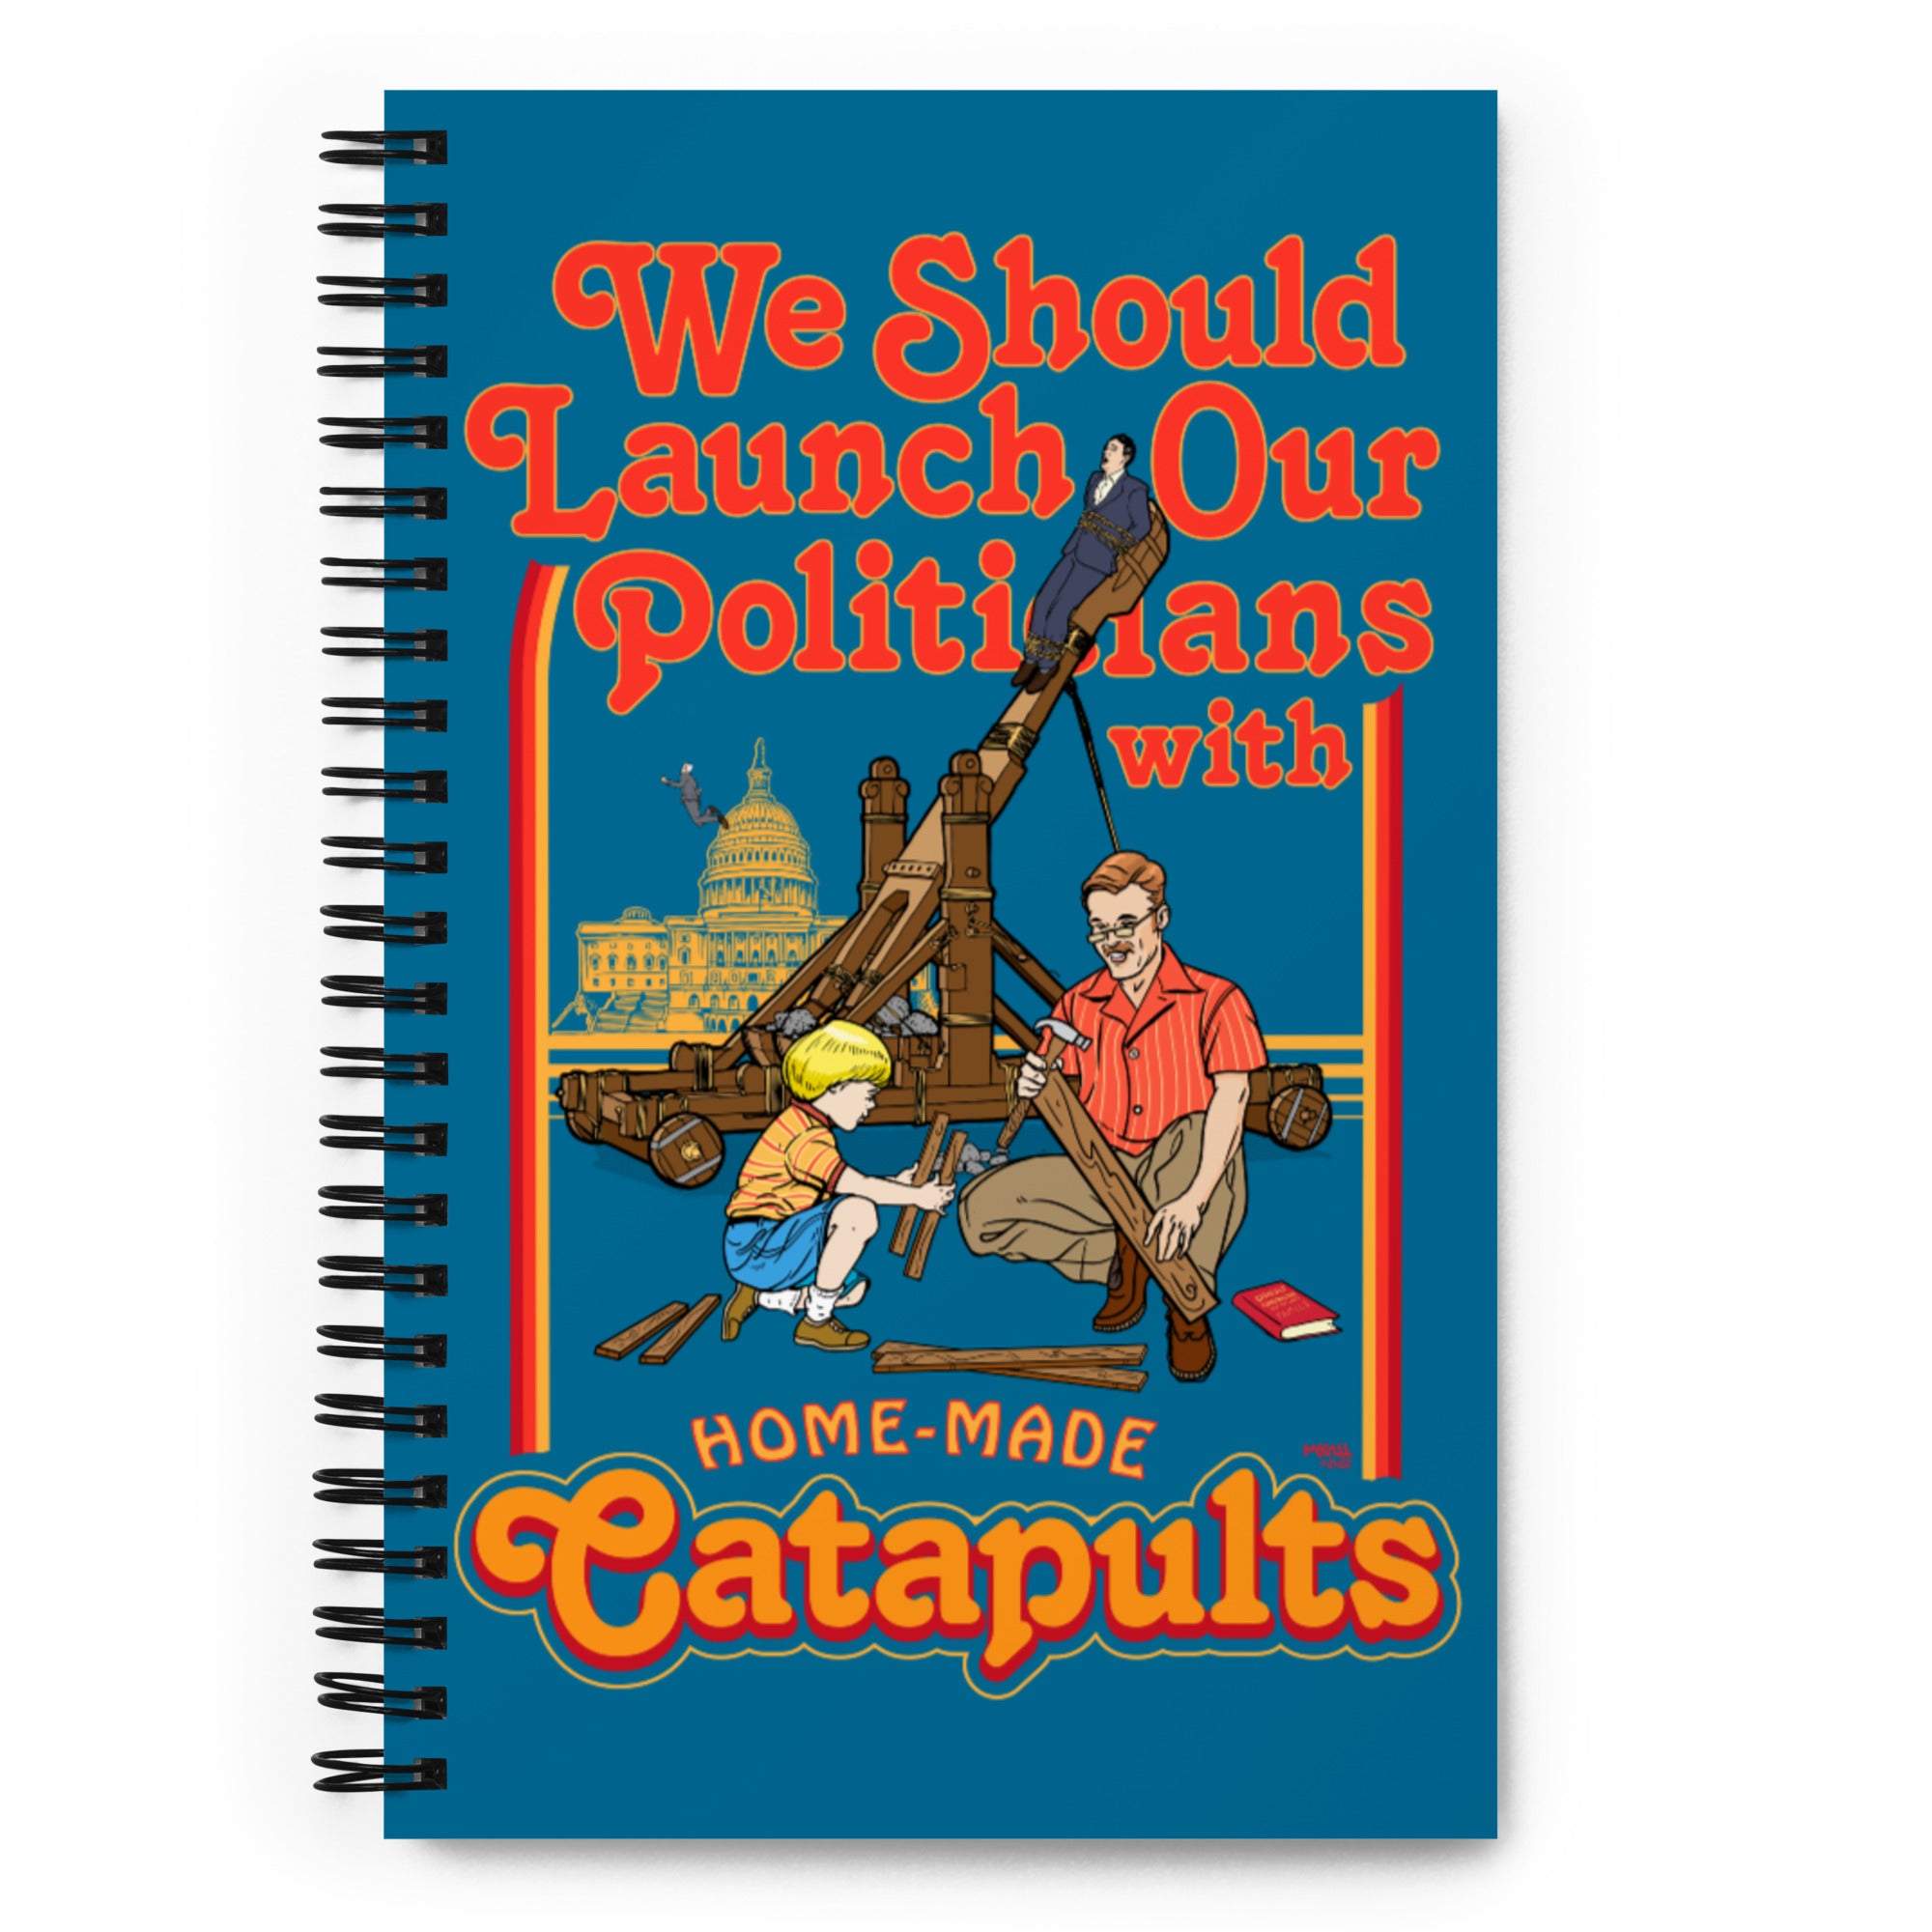 We Should Lauch Our Politicians from Homemade Catapults Spiral notebook